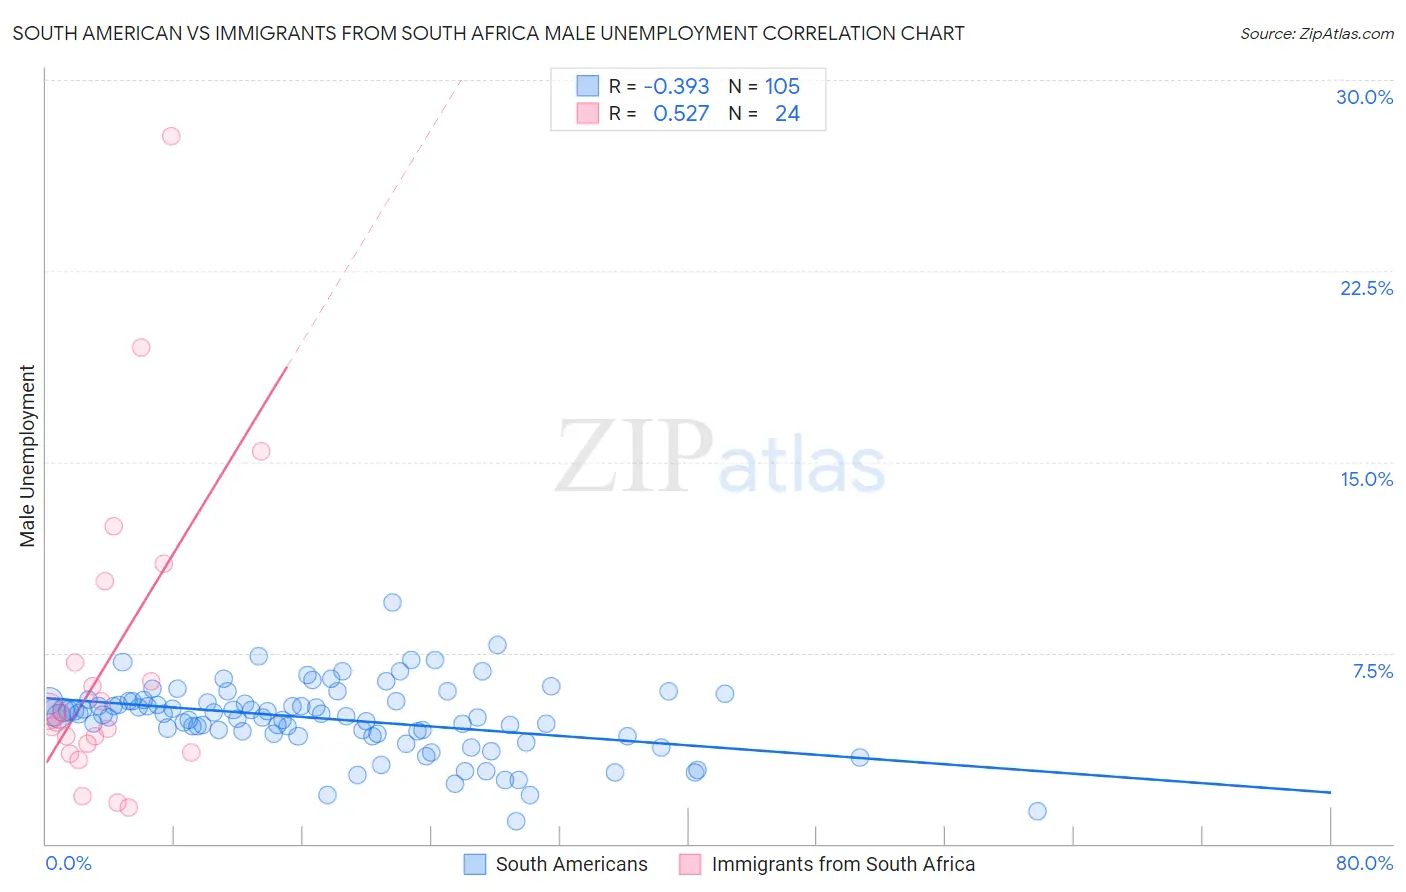 South American vs Immigrants from South Africa Male Unemployment